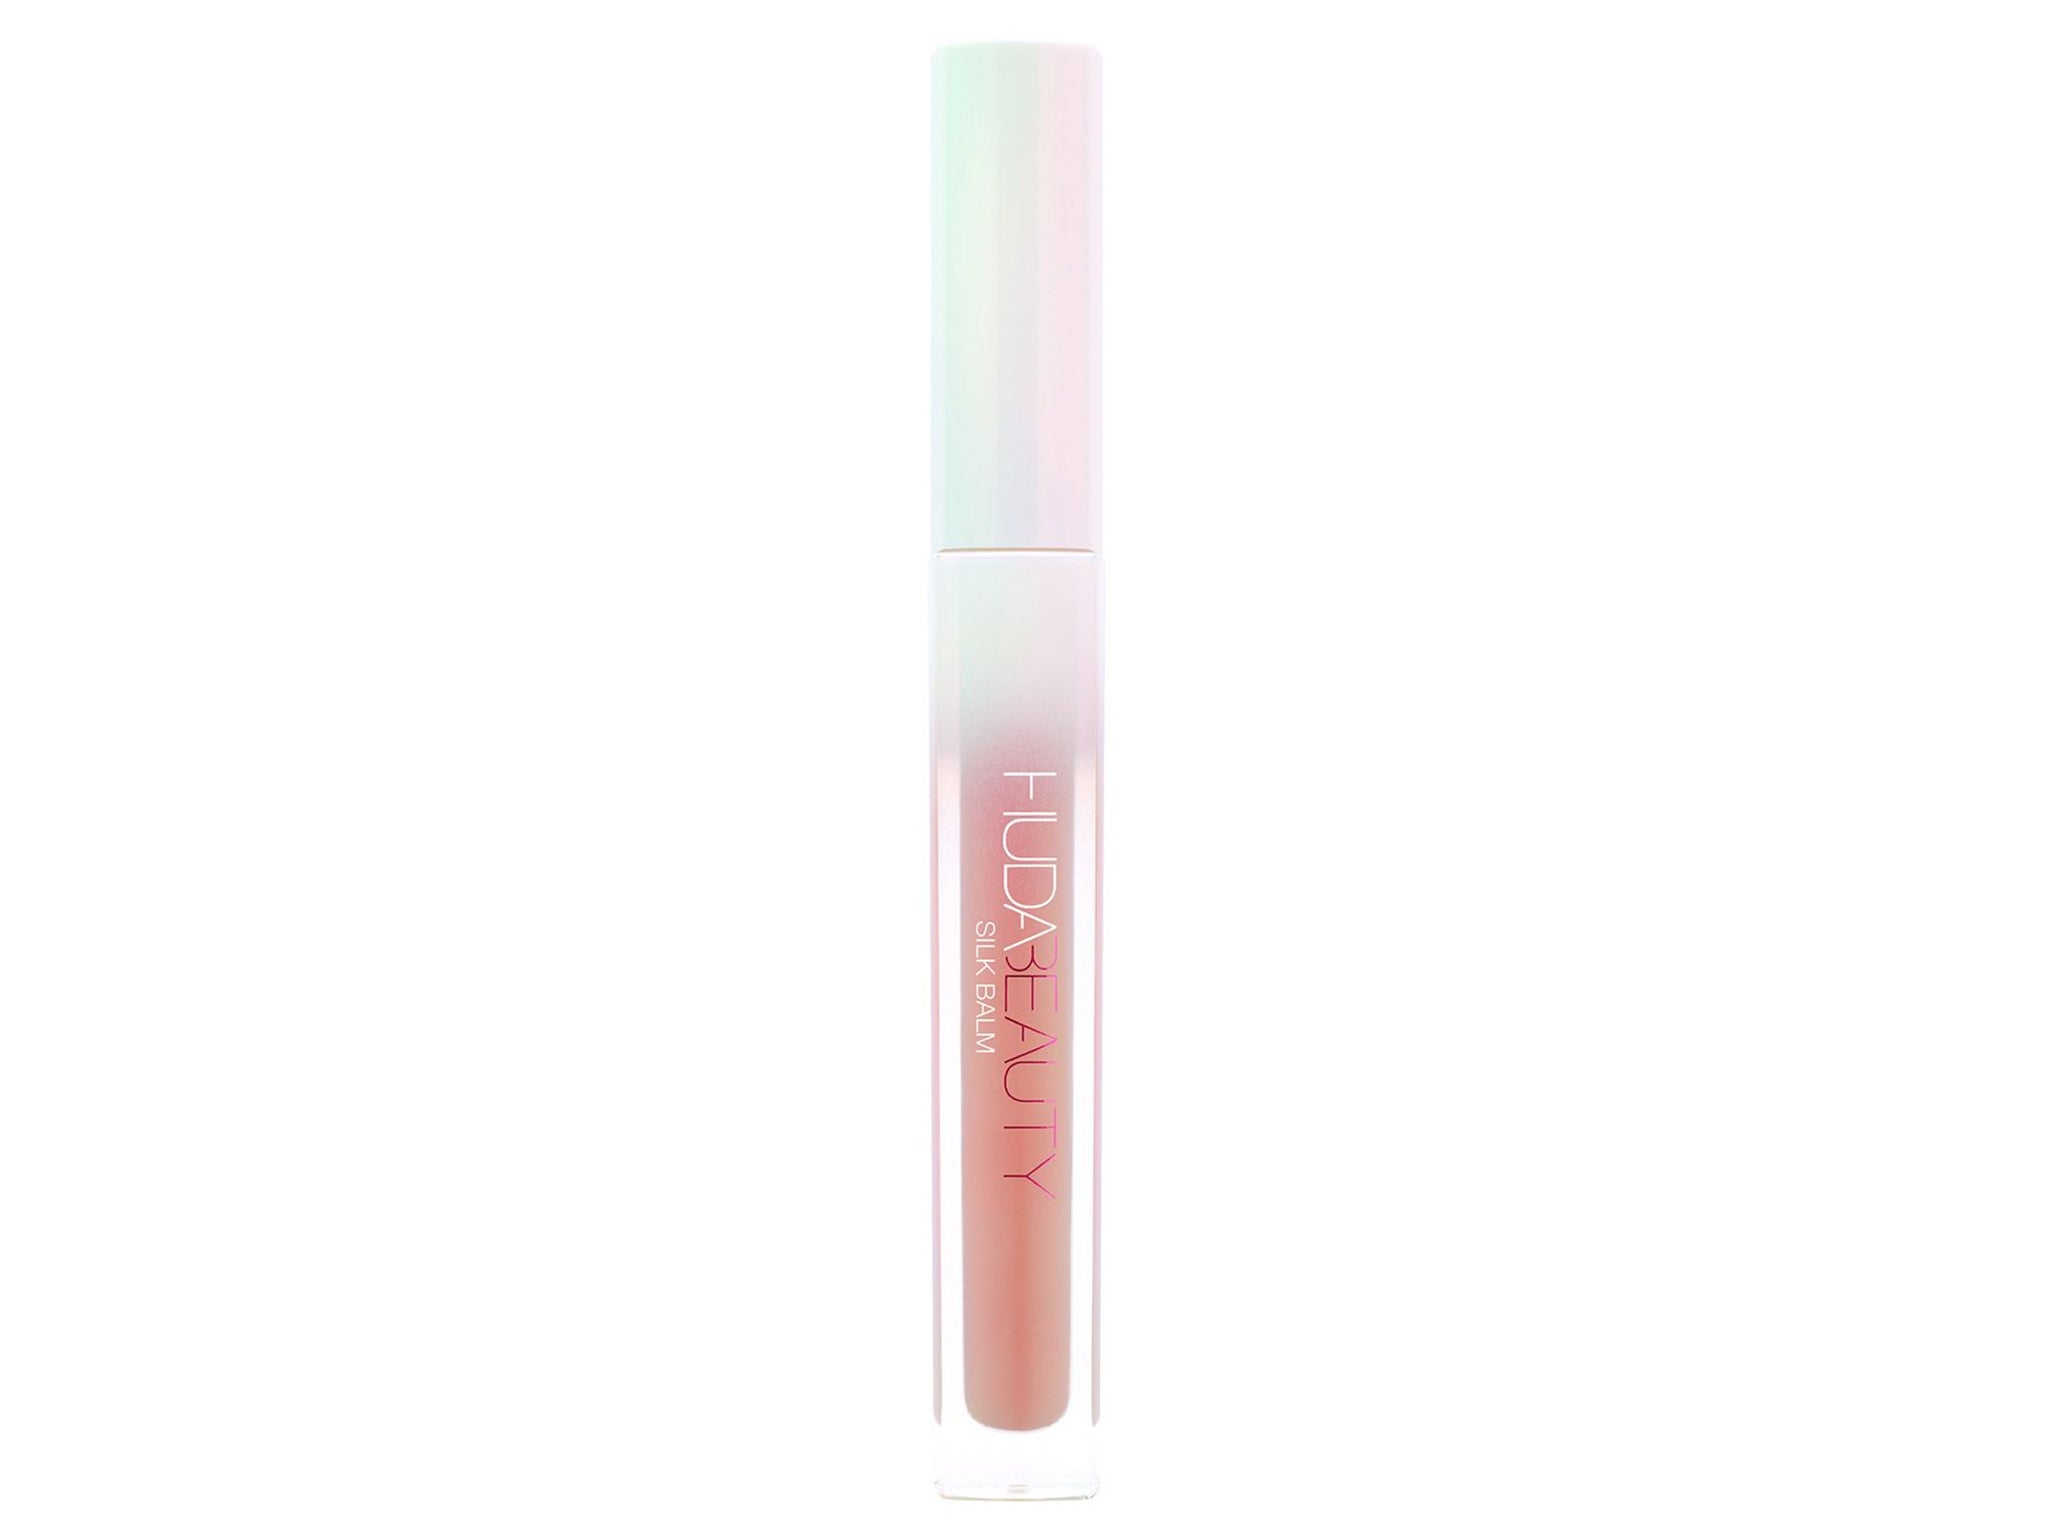 This lip balm gives a glossy, hydrating finish - the perfect last step of an indulgent at-home facial